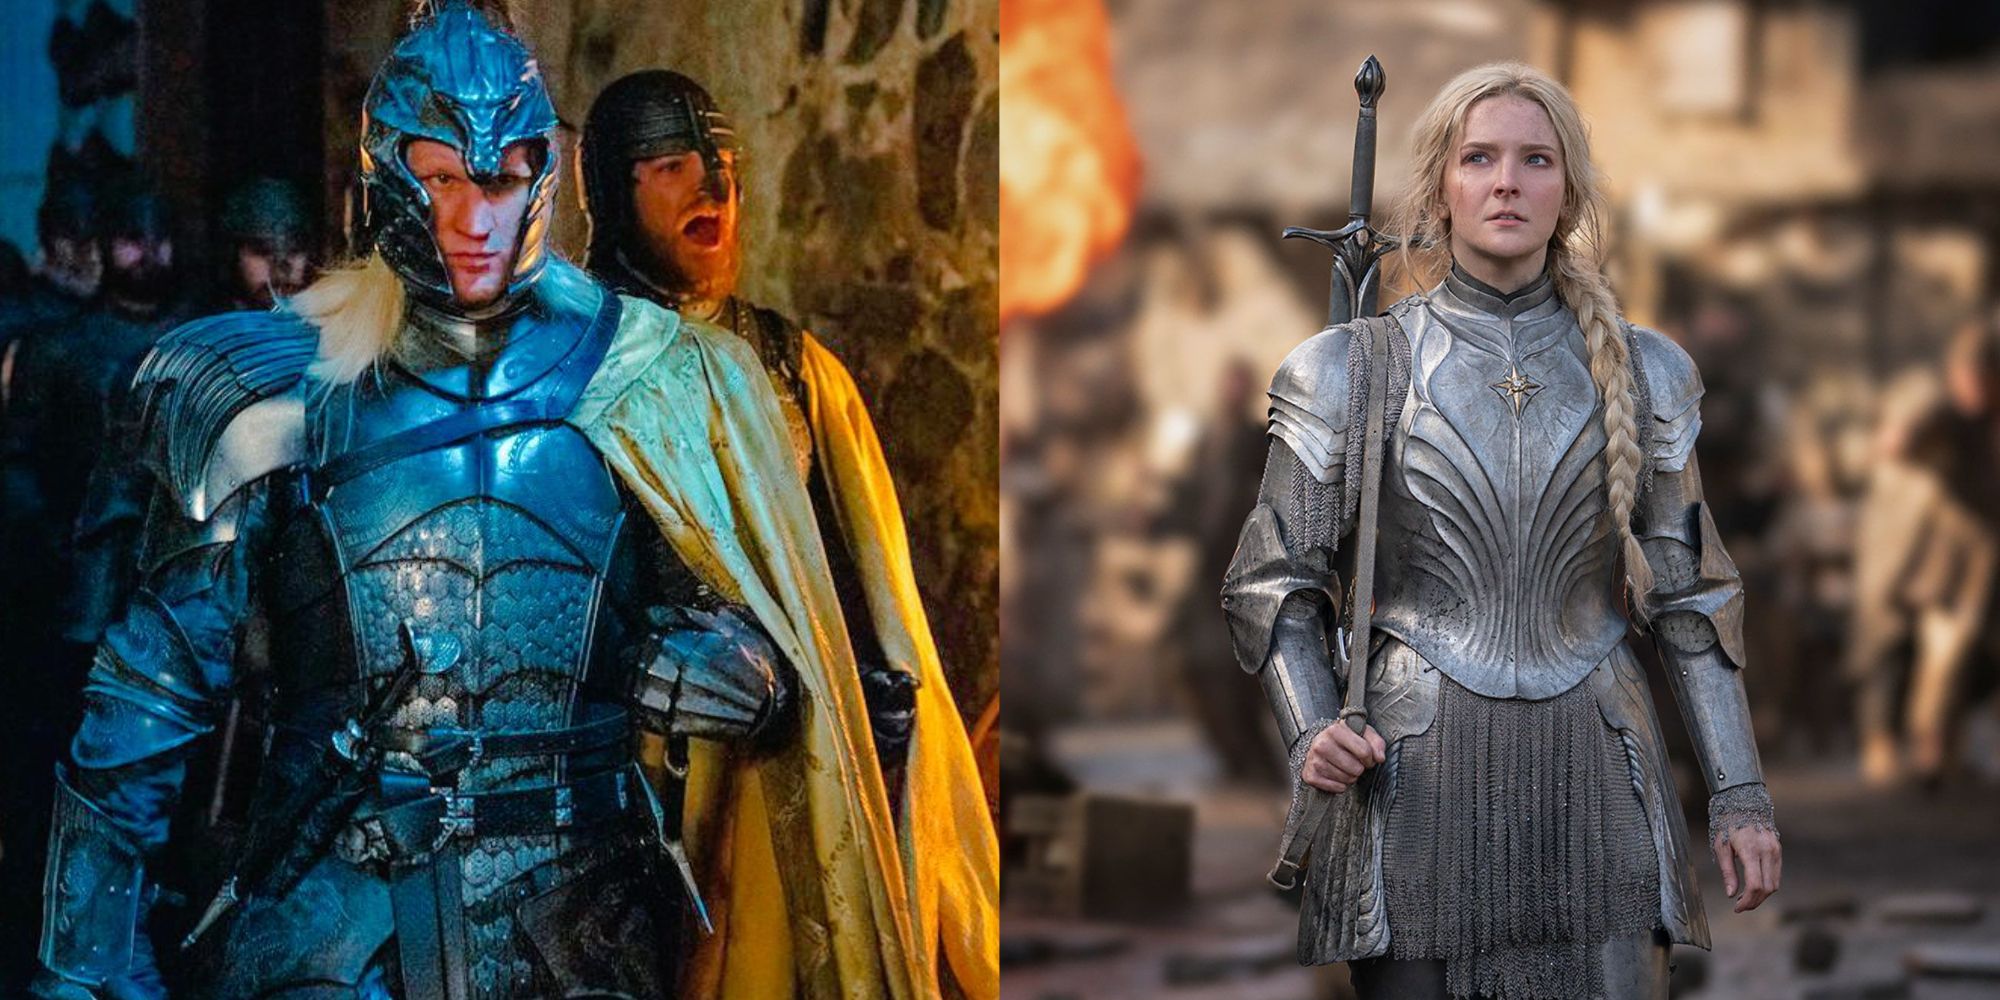 Split images of a man wearing armor and a woman wearing armor in House of the Dragon and Rings of Power